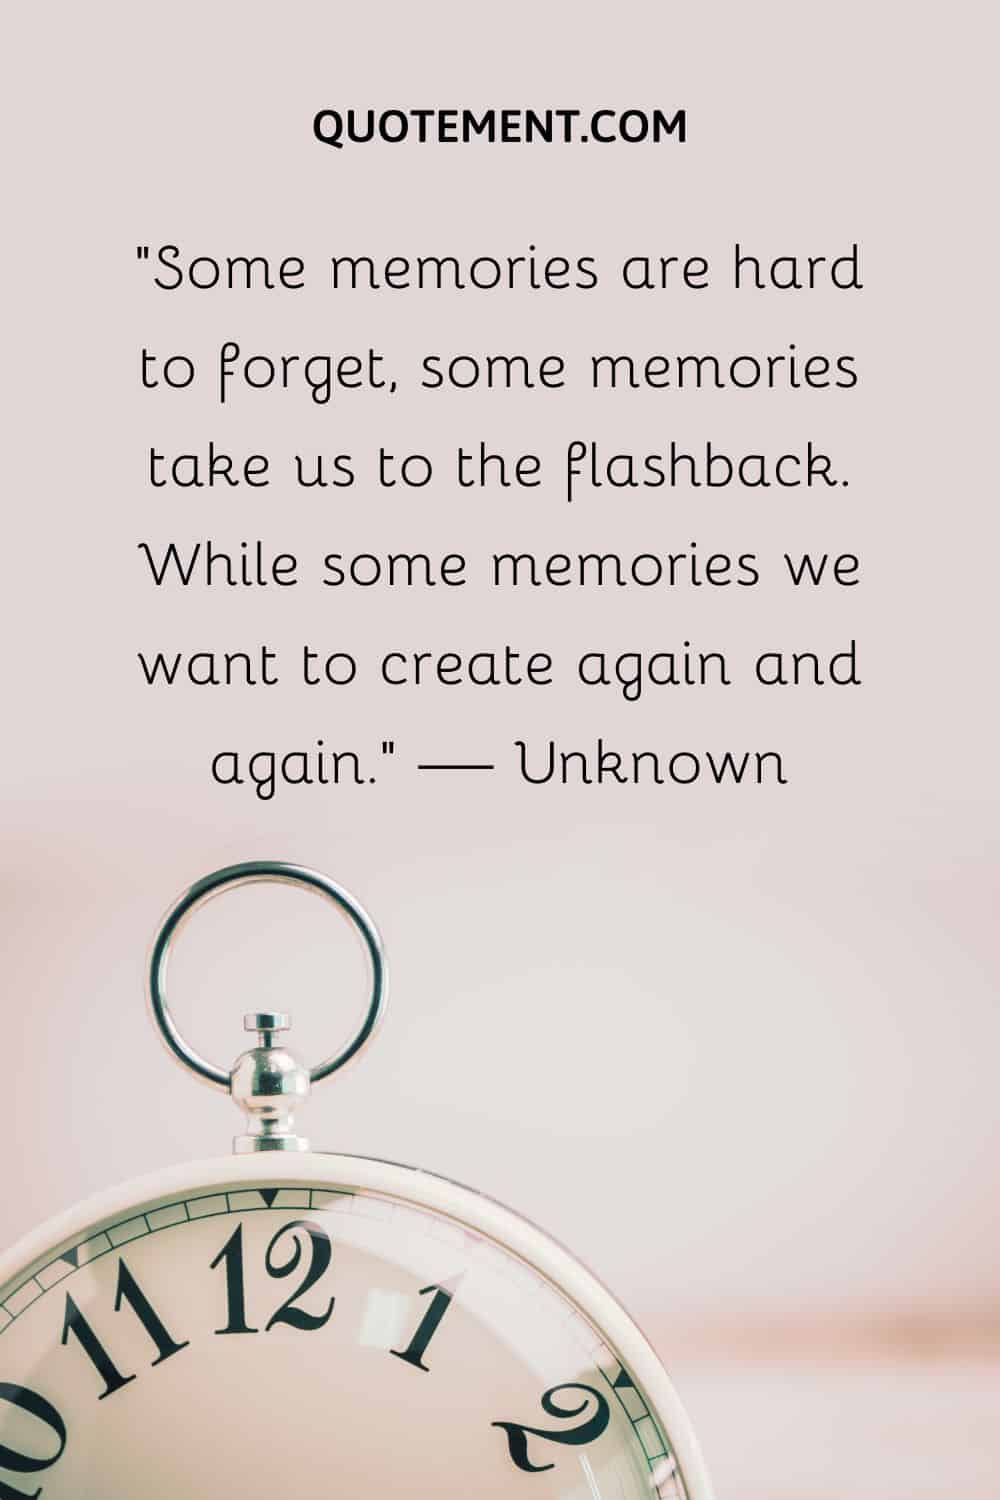 Some memories are hard to forget, some memories take us to the flashback